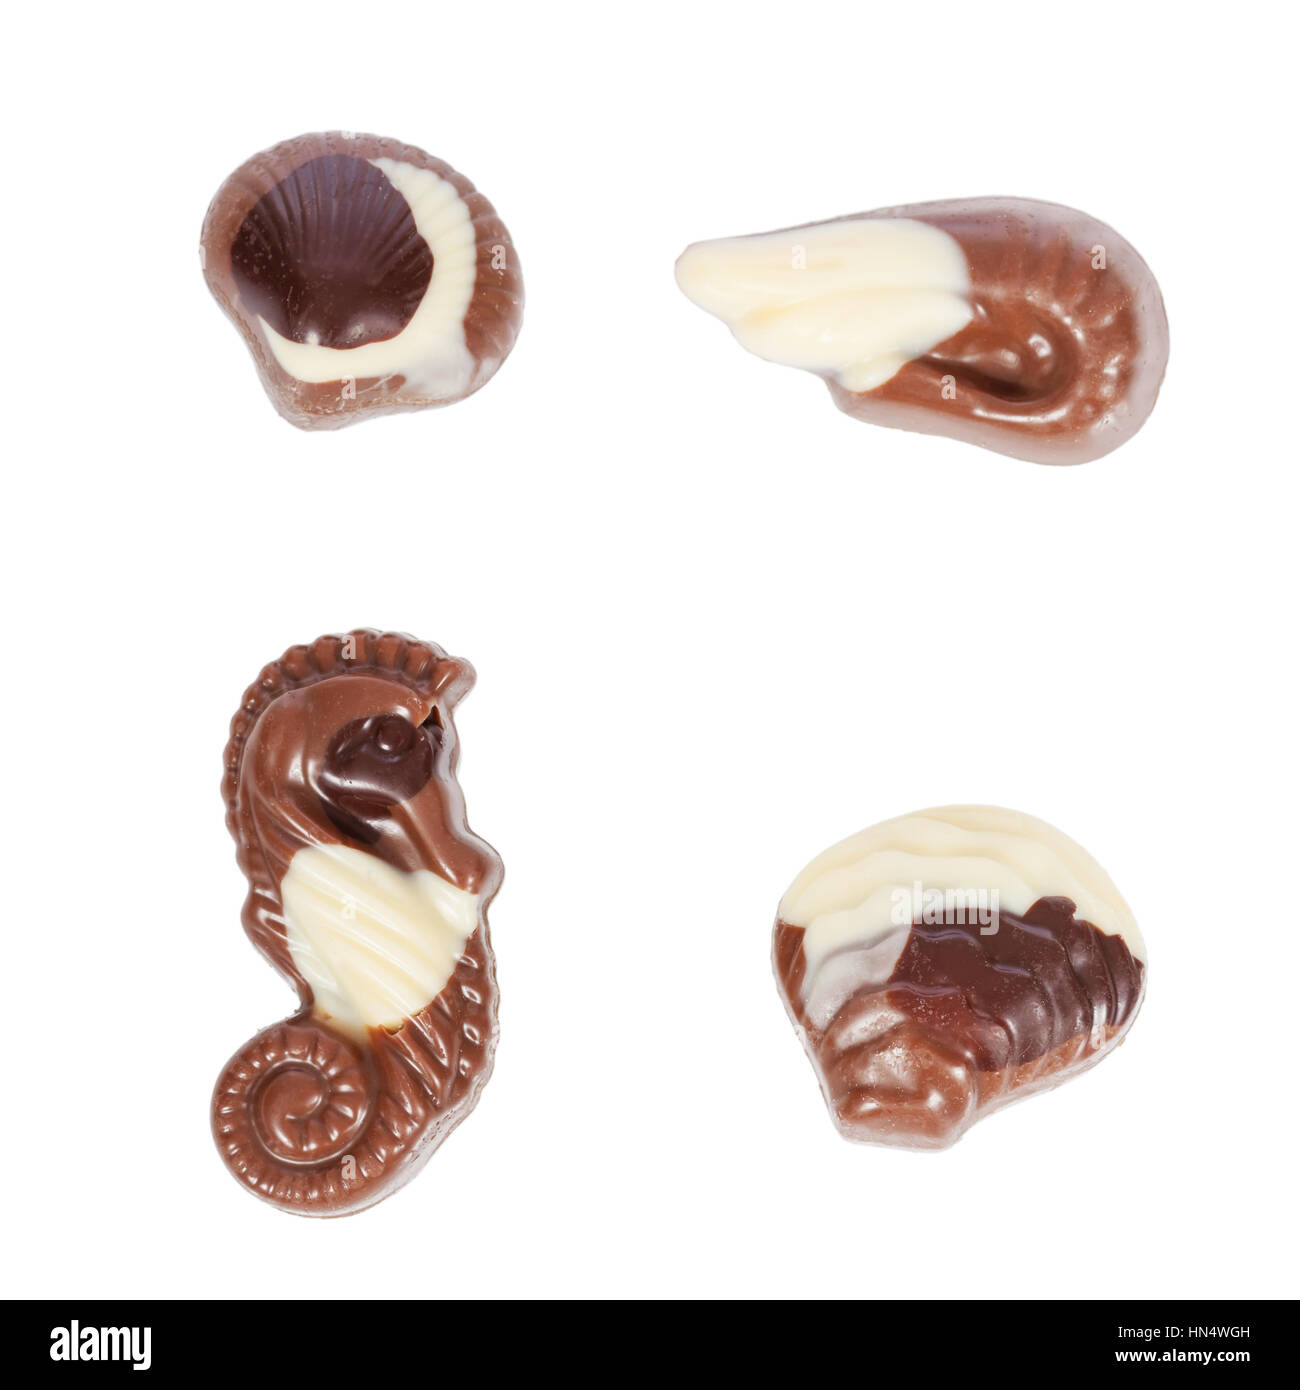 Pack, set or collection of belgian bonbons shaped as seashells isolated on white background Stock Photo